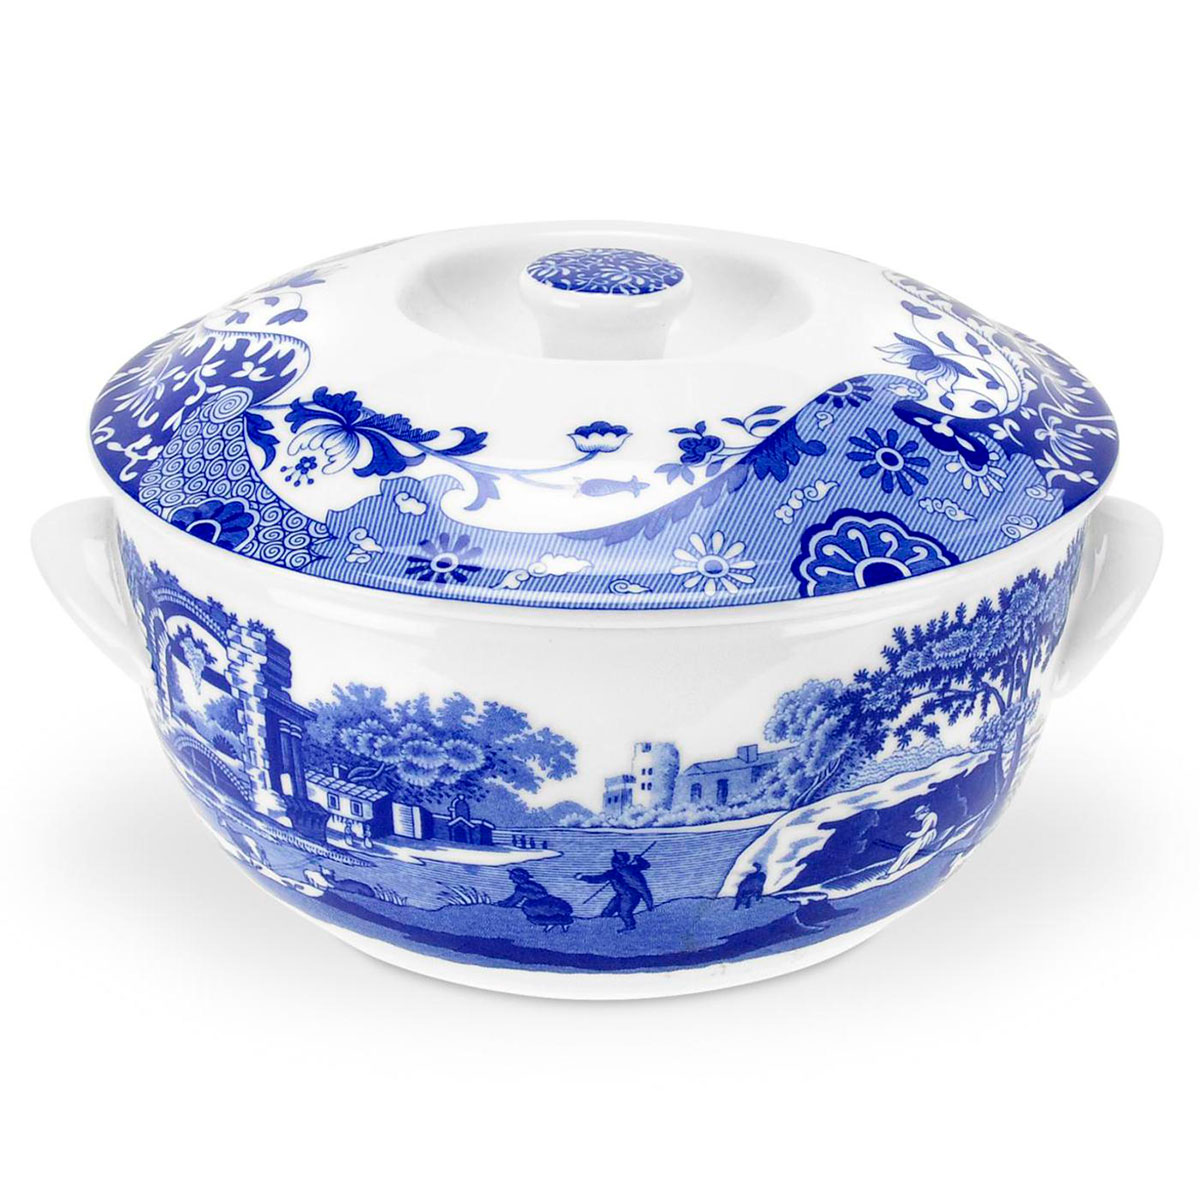 Spode Blue Italian Bakeware Round Covered Deep Dish